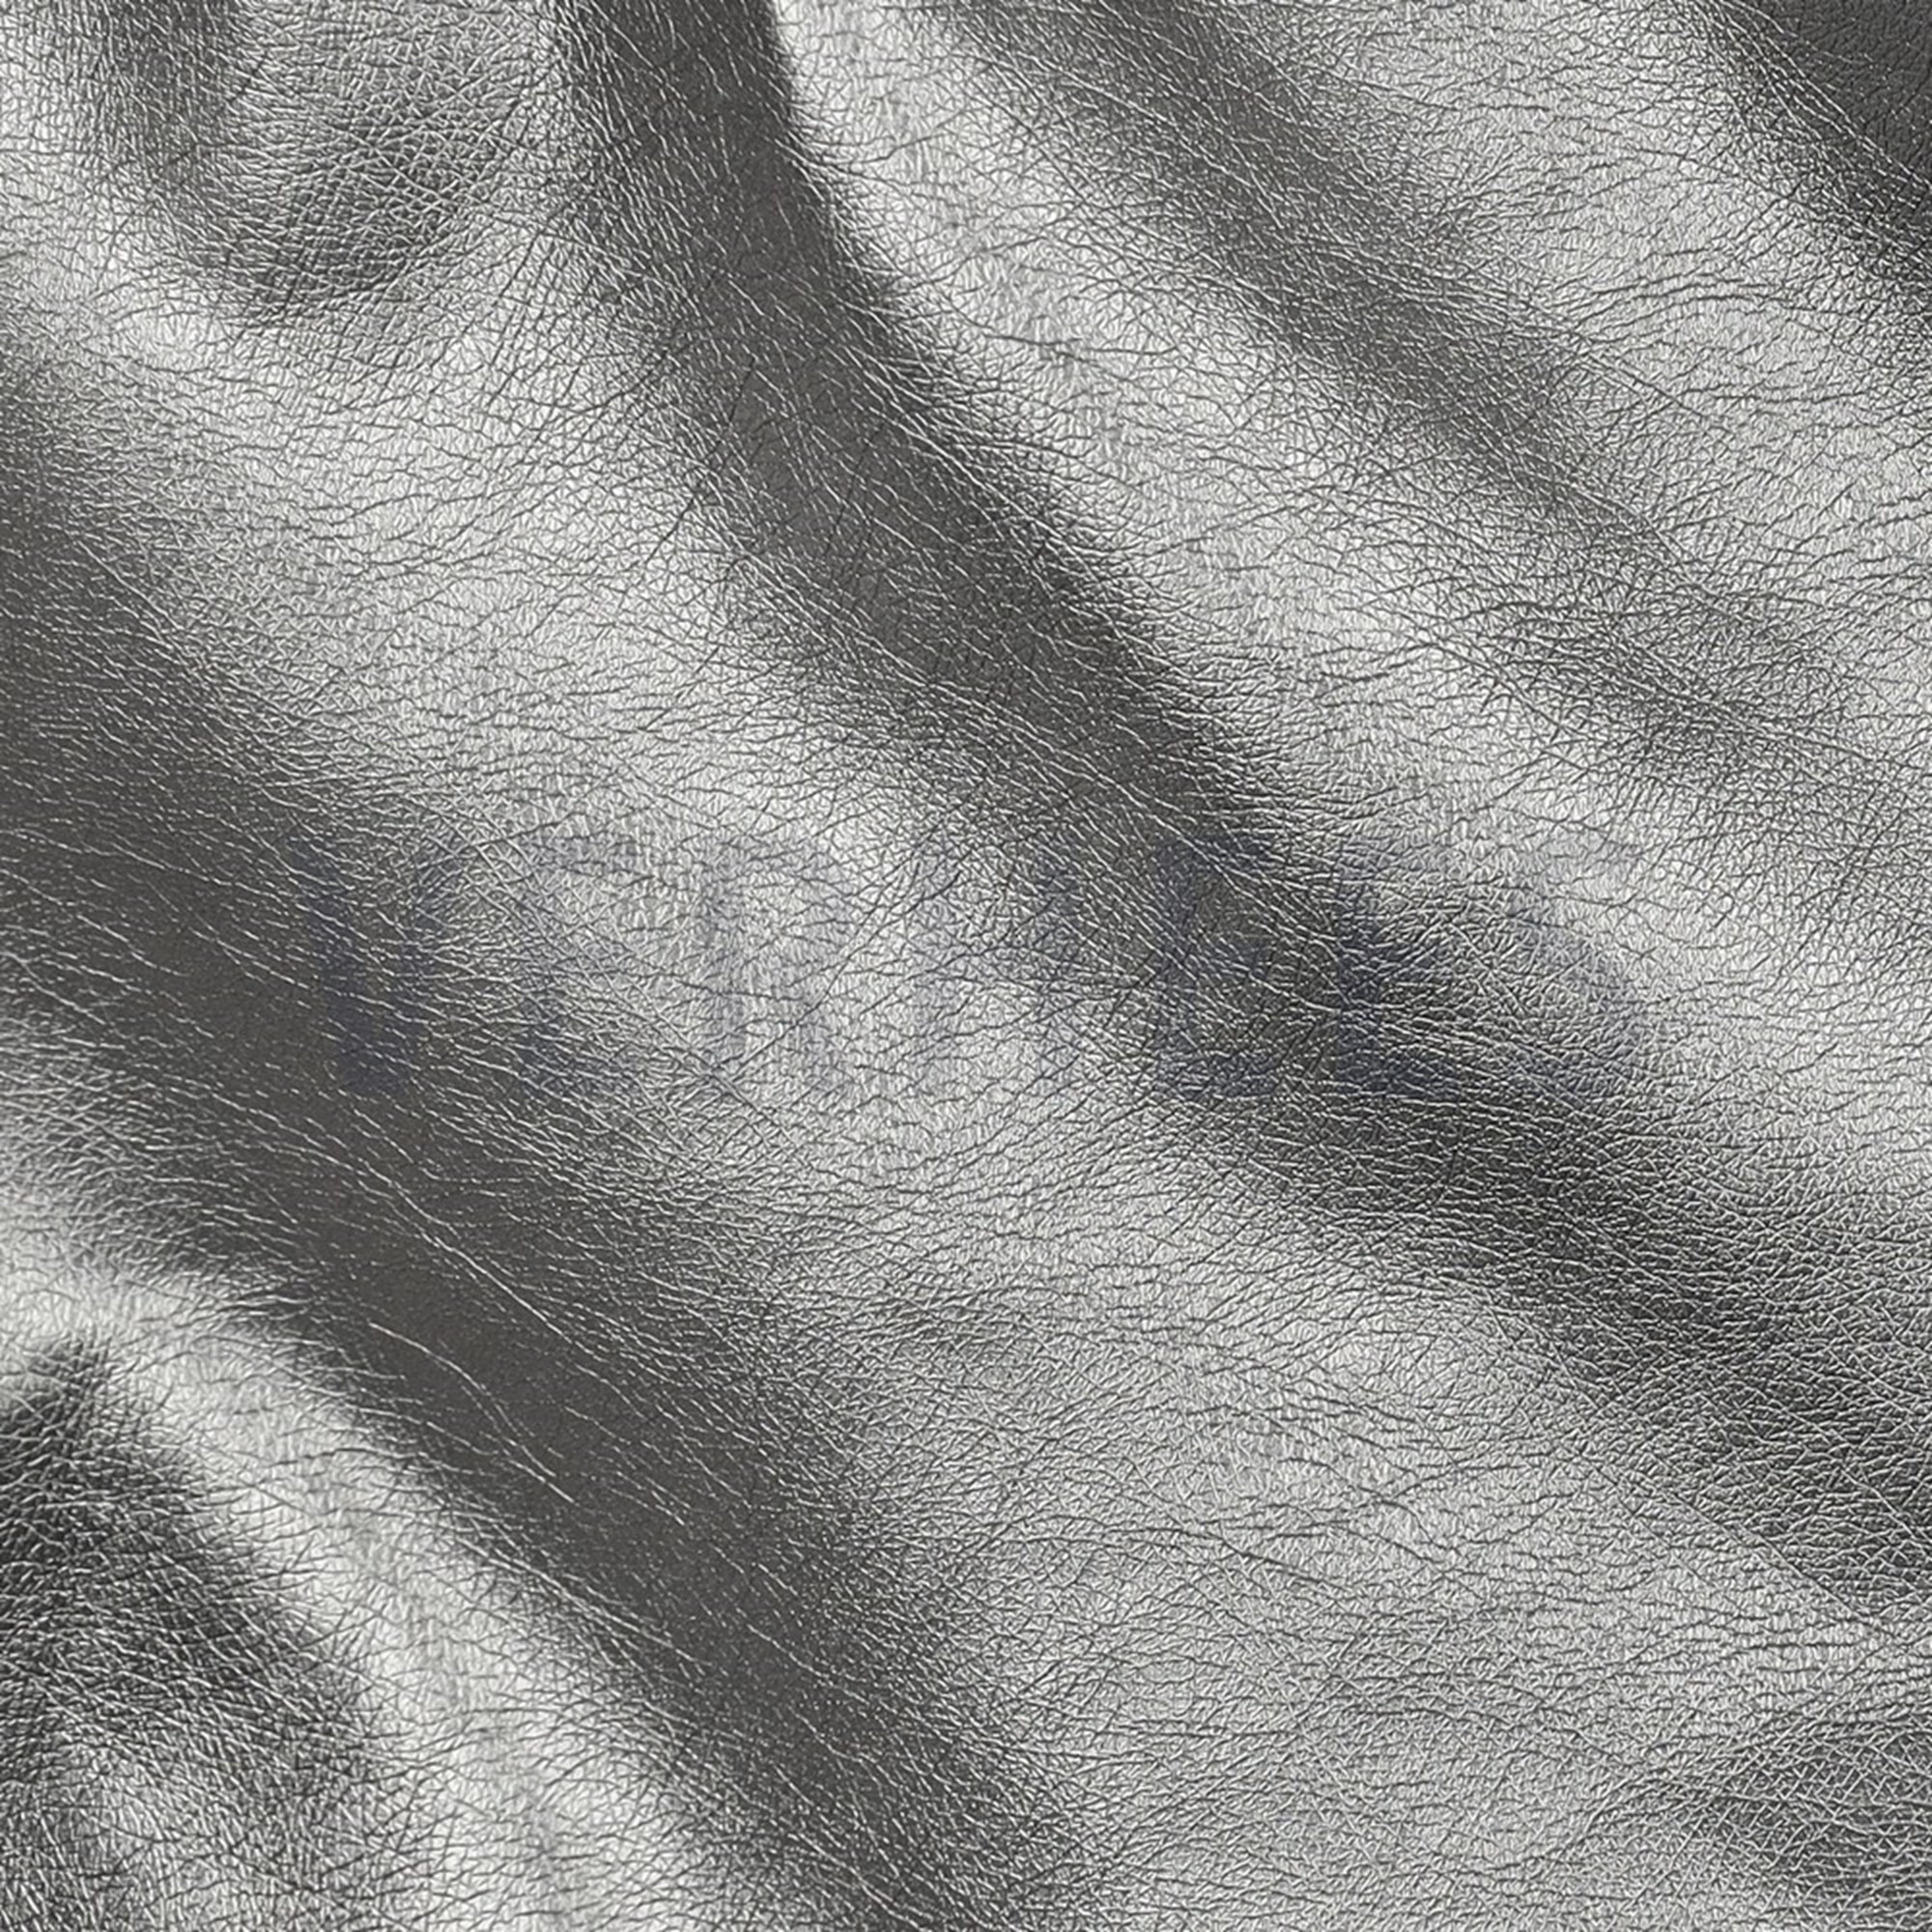 FAUX LEATHER SILVER METALLIC (high resolution) #2